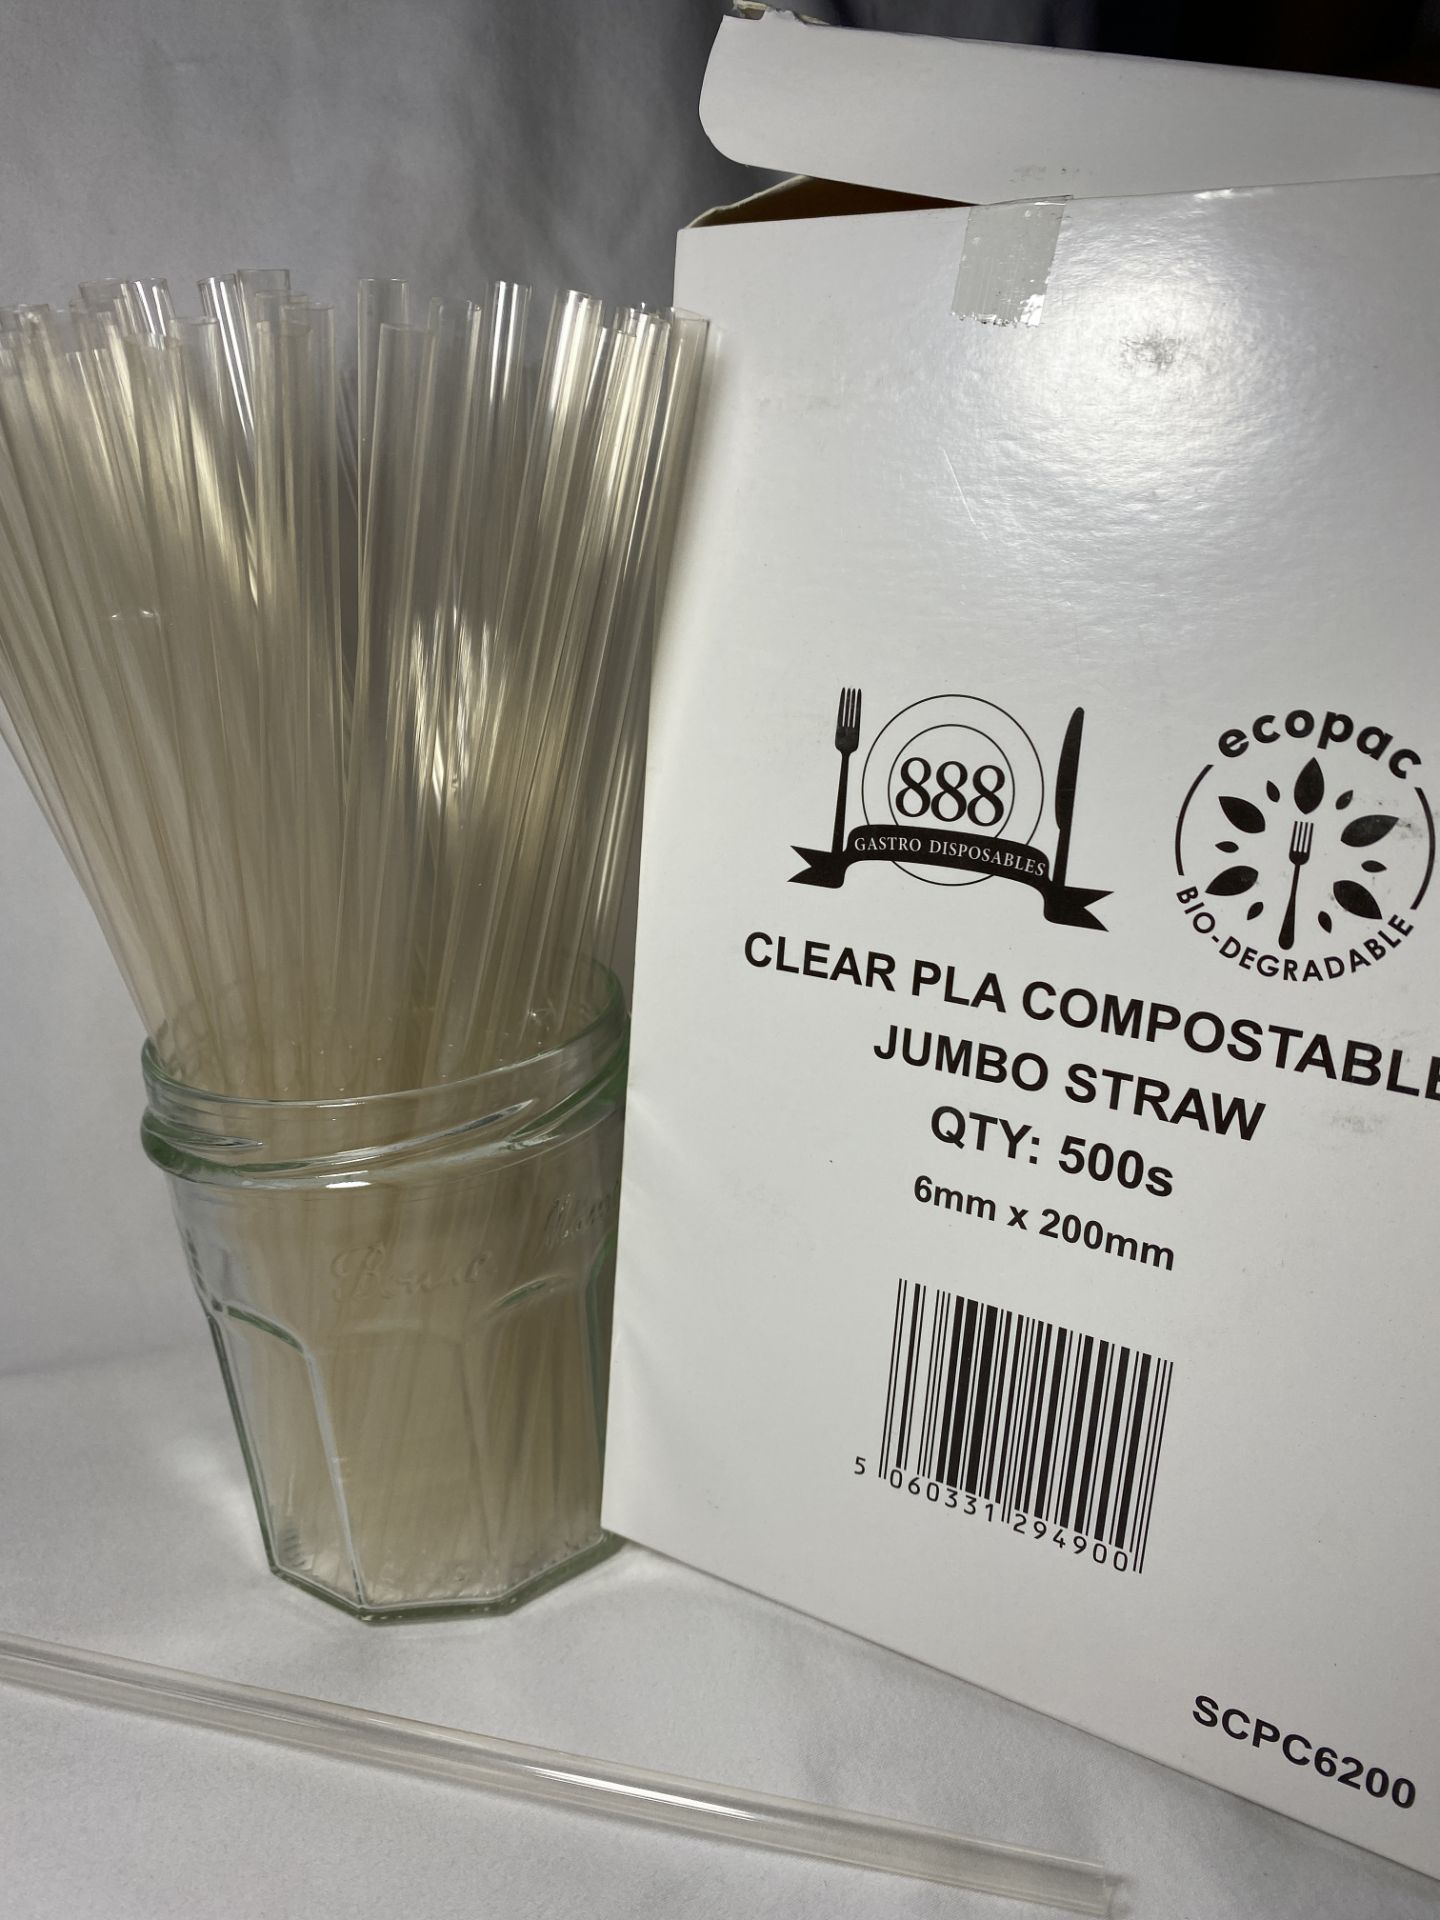 2 x Boxes of Clear PLA Compostable Jumbo Straws by 888 Gastro Disposables | DSP59